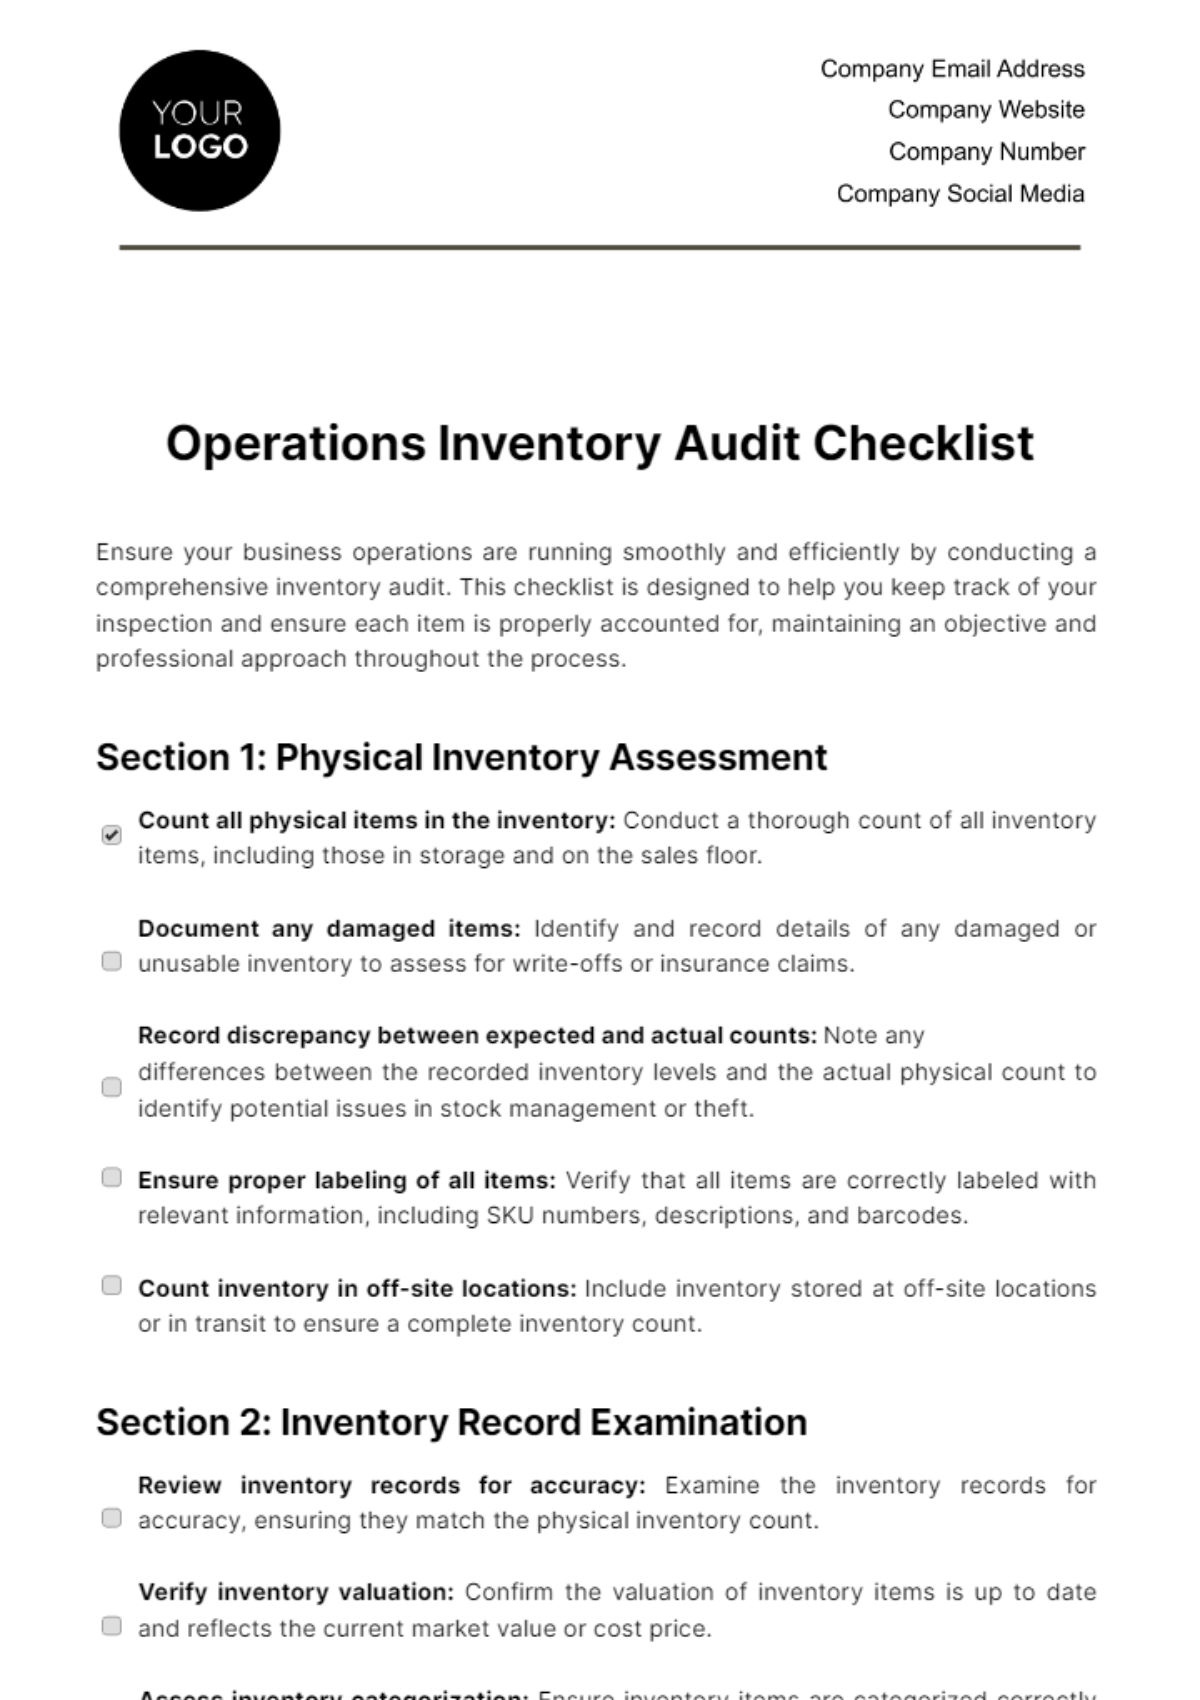 Free Operations Inventory Audit Checklist Template